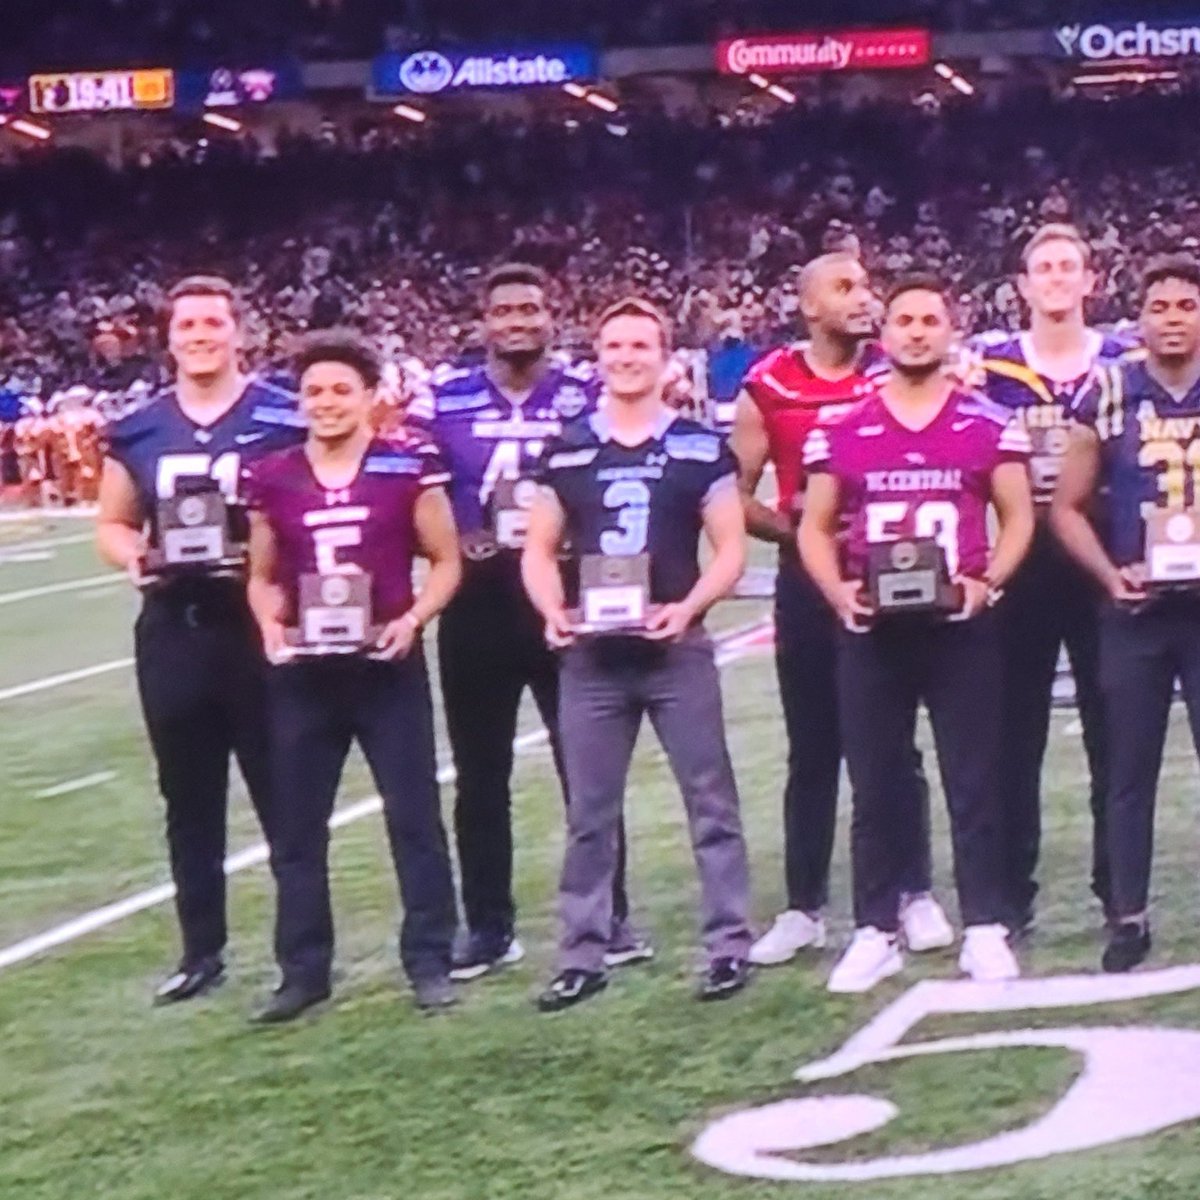 There's @MsideFootball's KJ Williams on the field of the Sugar Bowl representing Morningside on the AFCA Allstate Good Works Team.